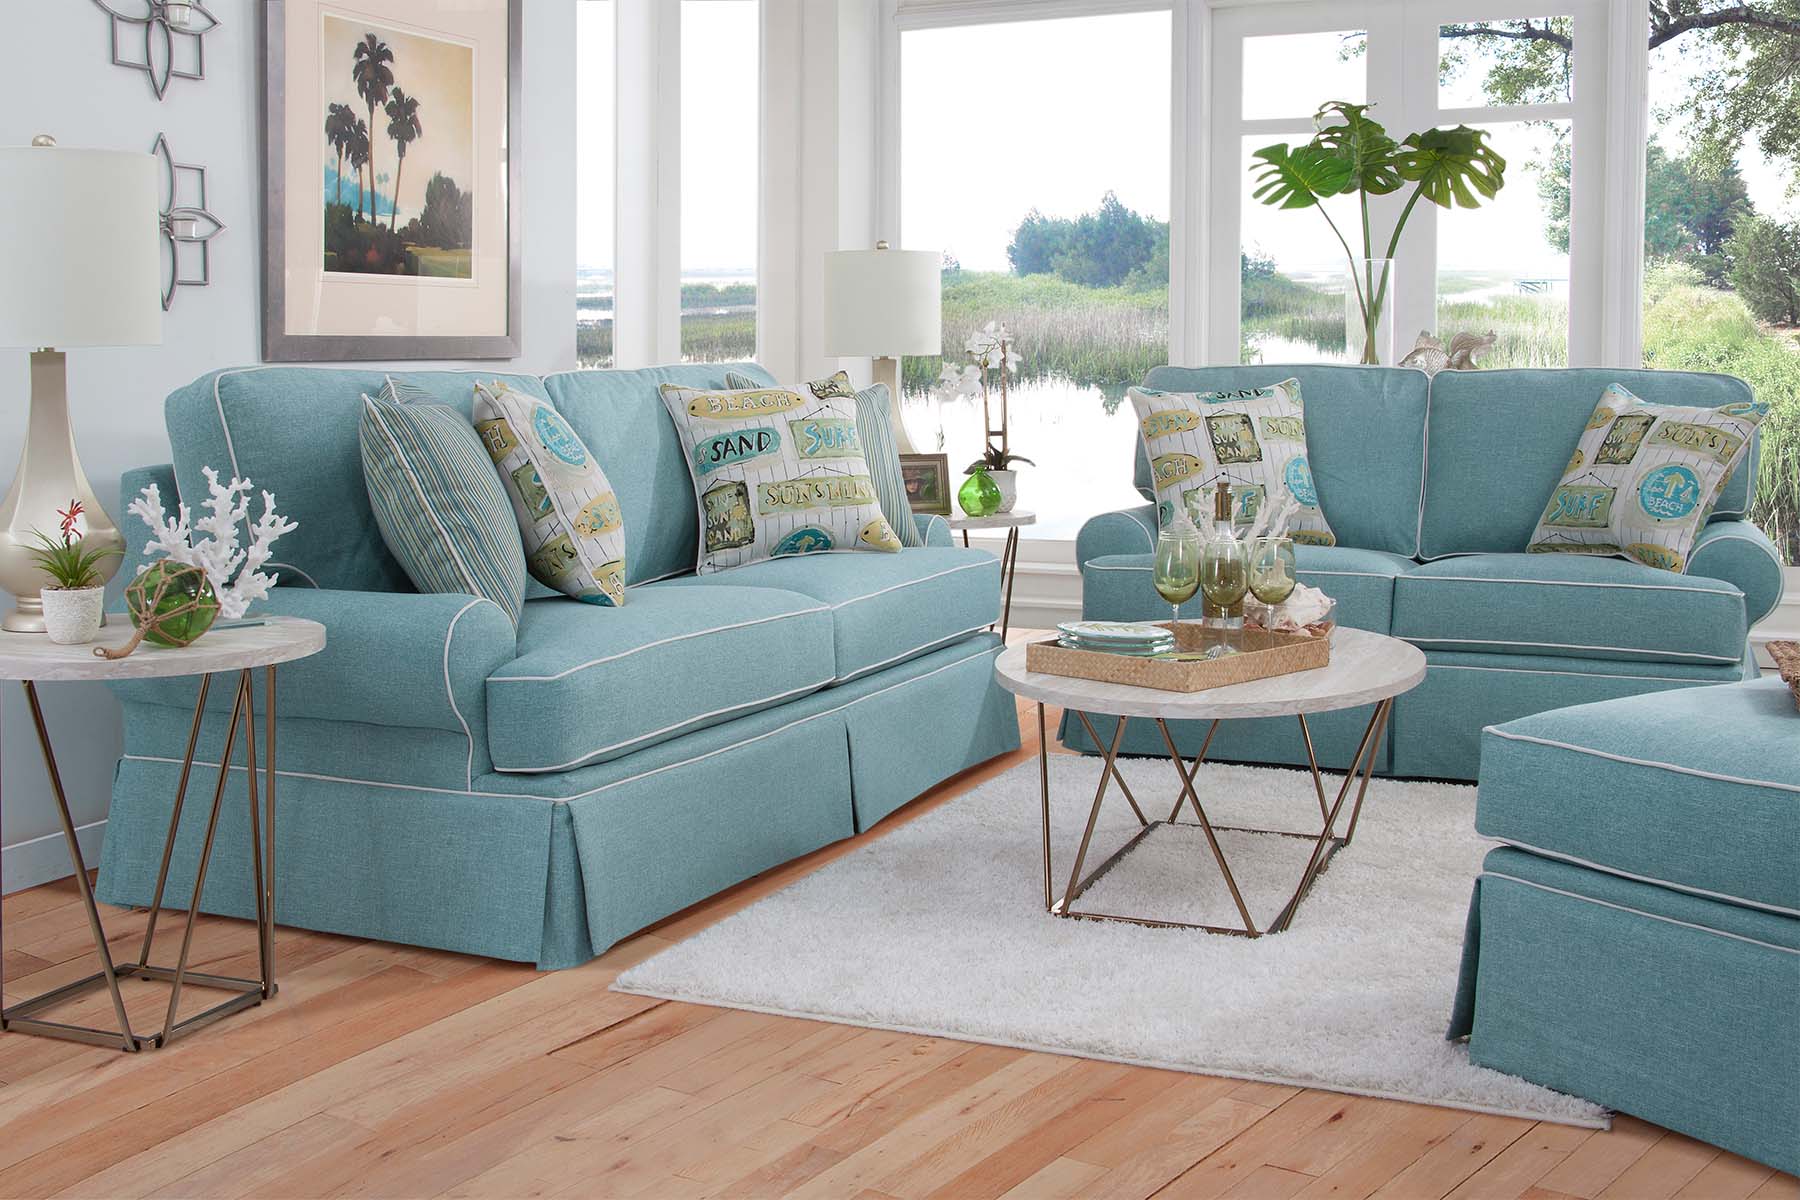 S275A Sofa and Loveseat Set